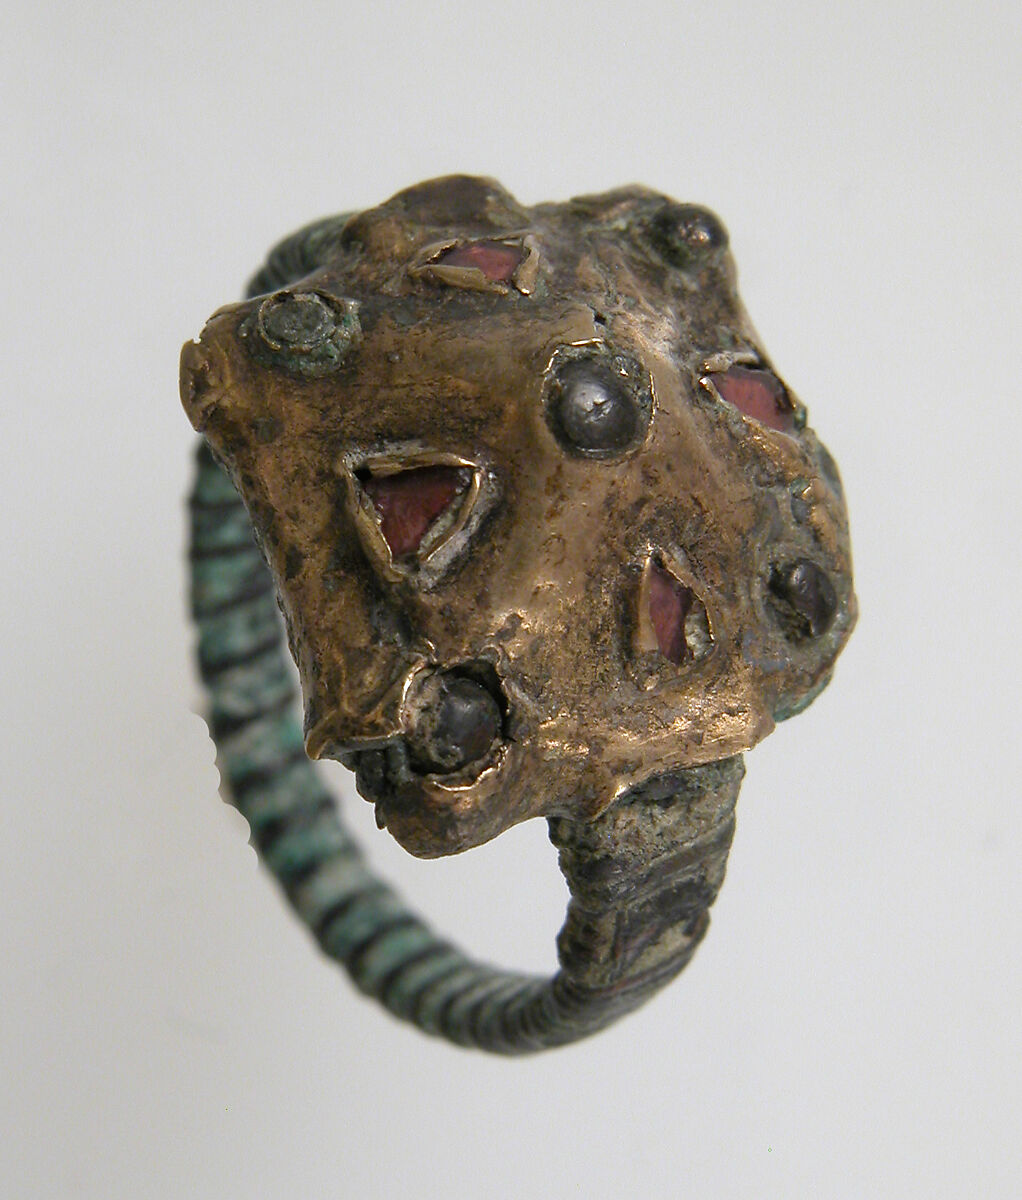 Finger Ring, Copper alloy band?, silver bezel coated with gold, garnet or glass paste, Frankish 